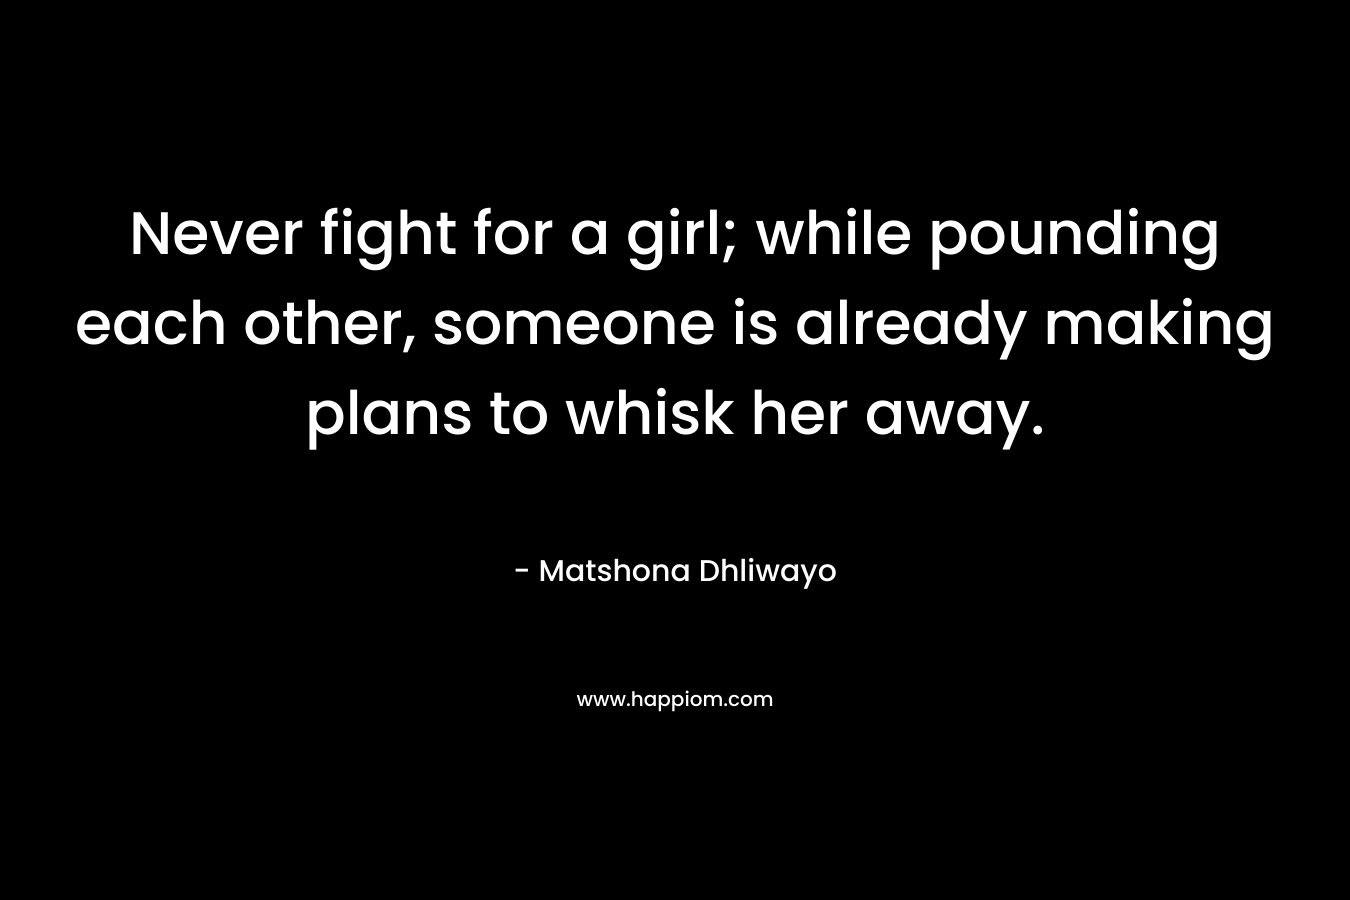 Never fight for a girl; while pounding each other, someone is already making plans to whisk her away.